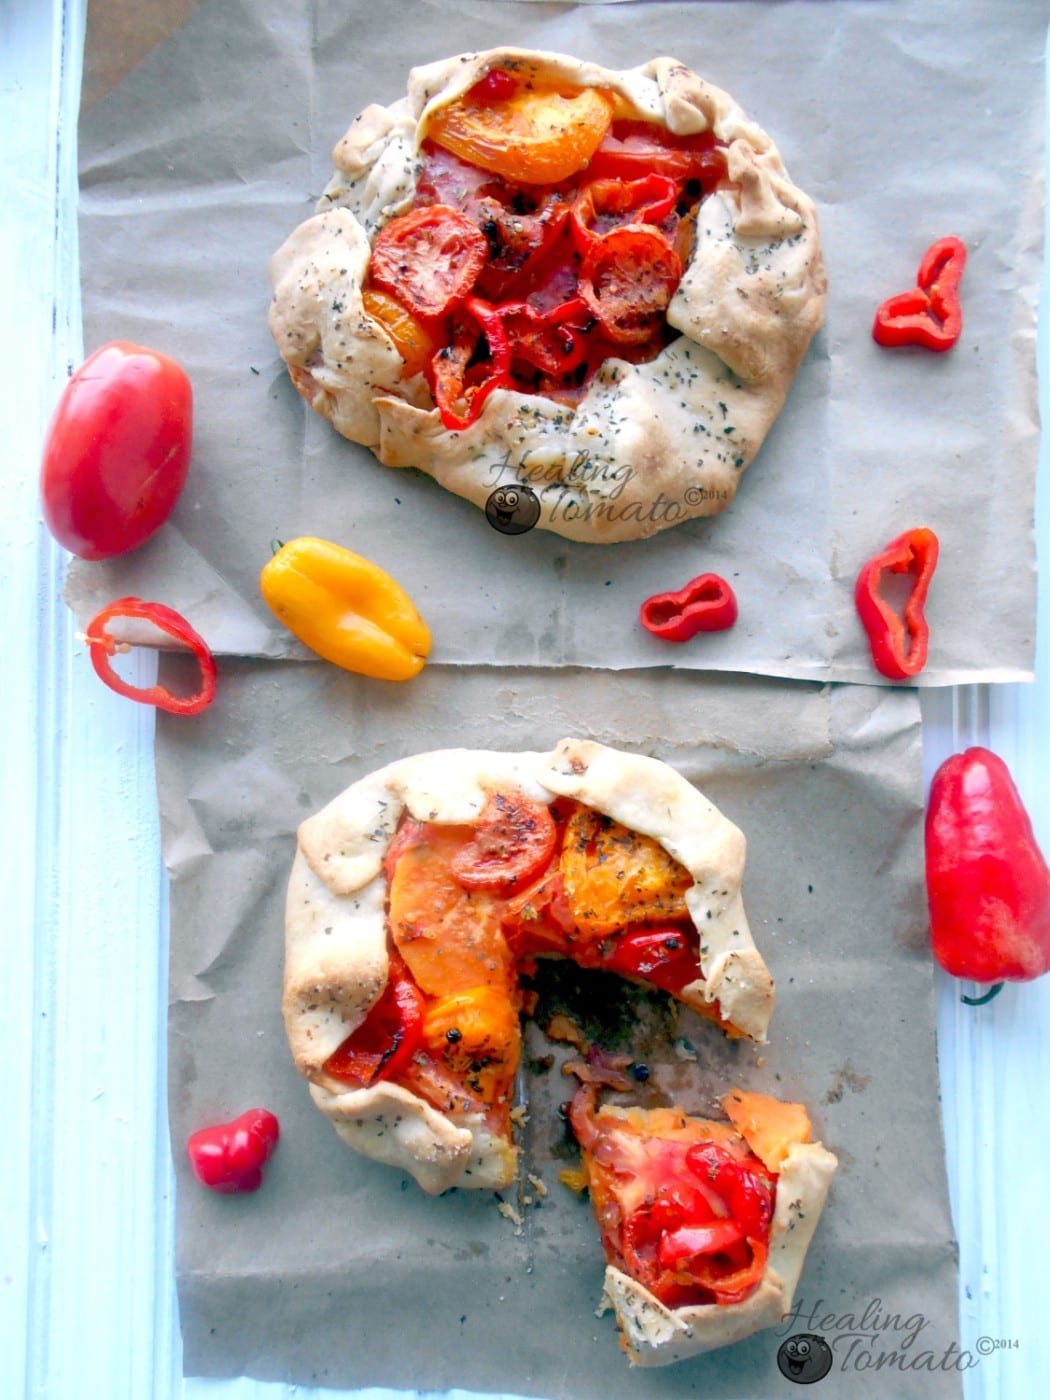 Top view of Tomato Galette on brown paper